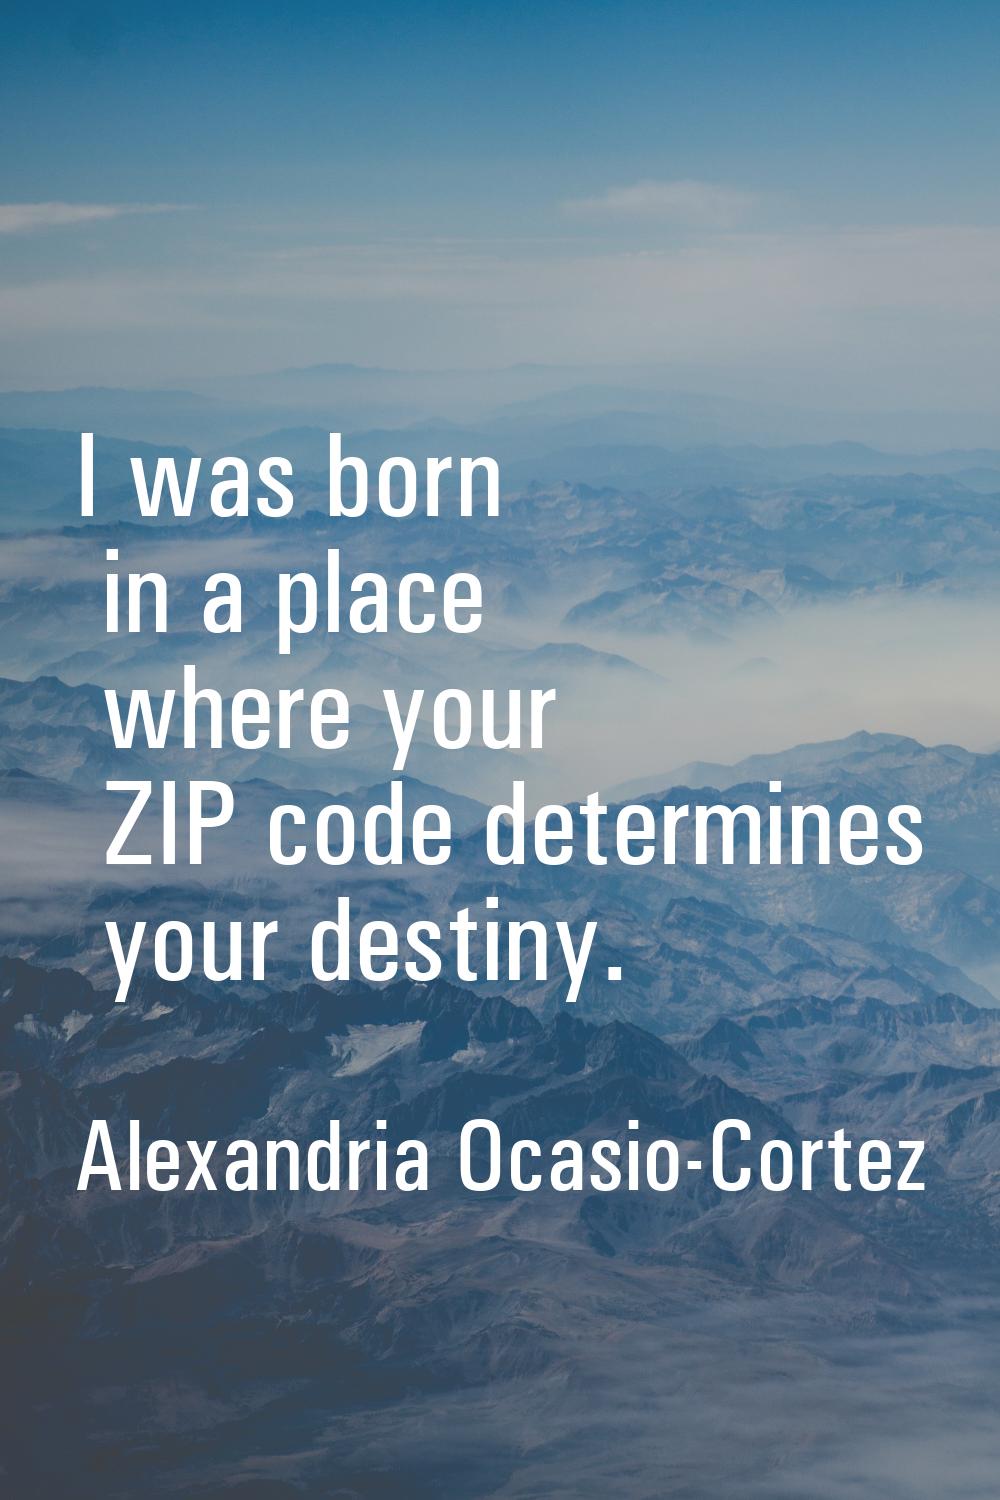 I was born in a place where your ZIP code determines your destiny.